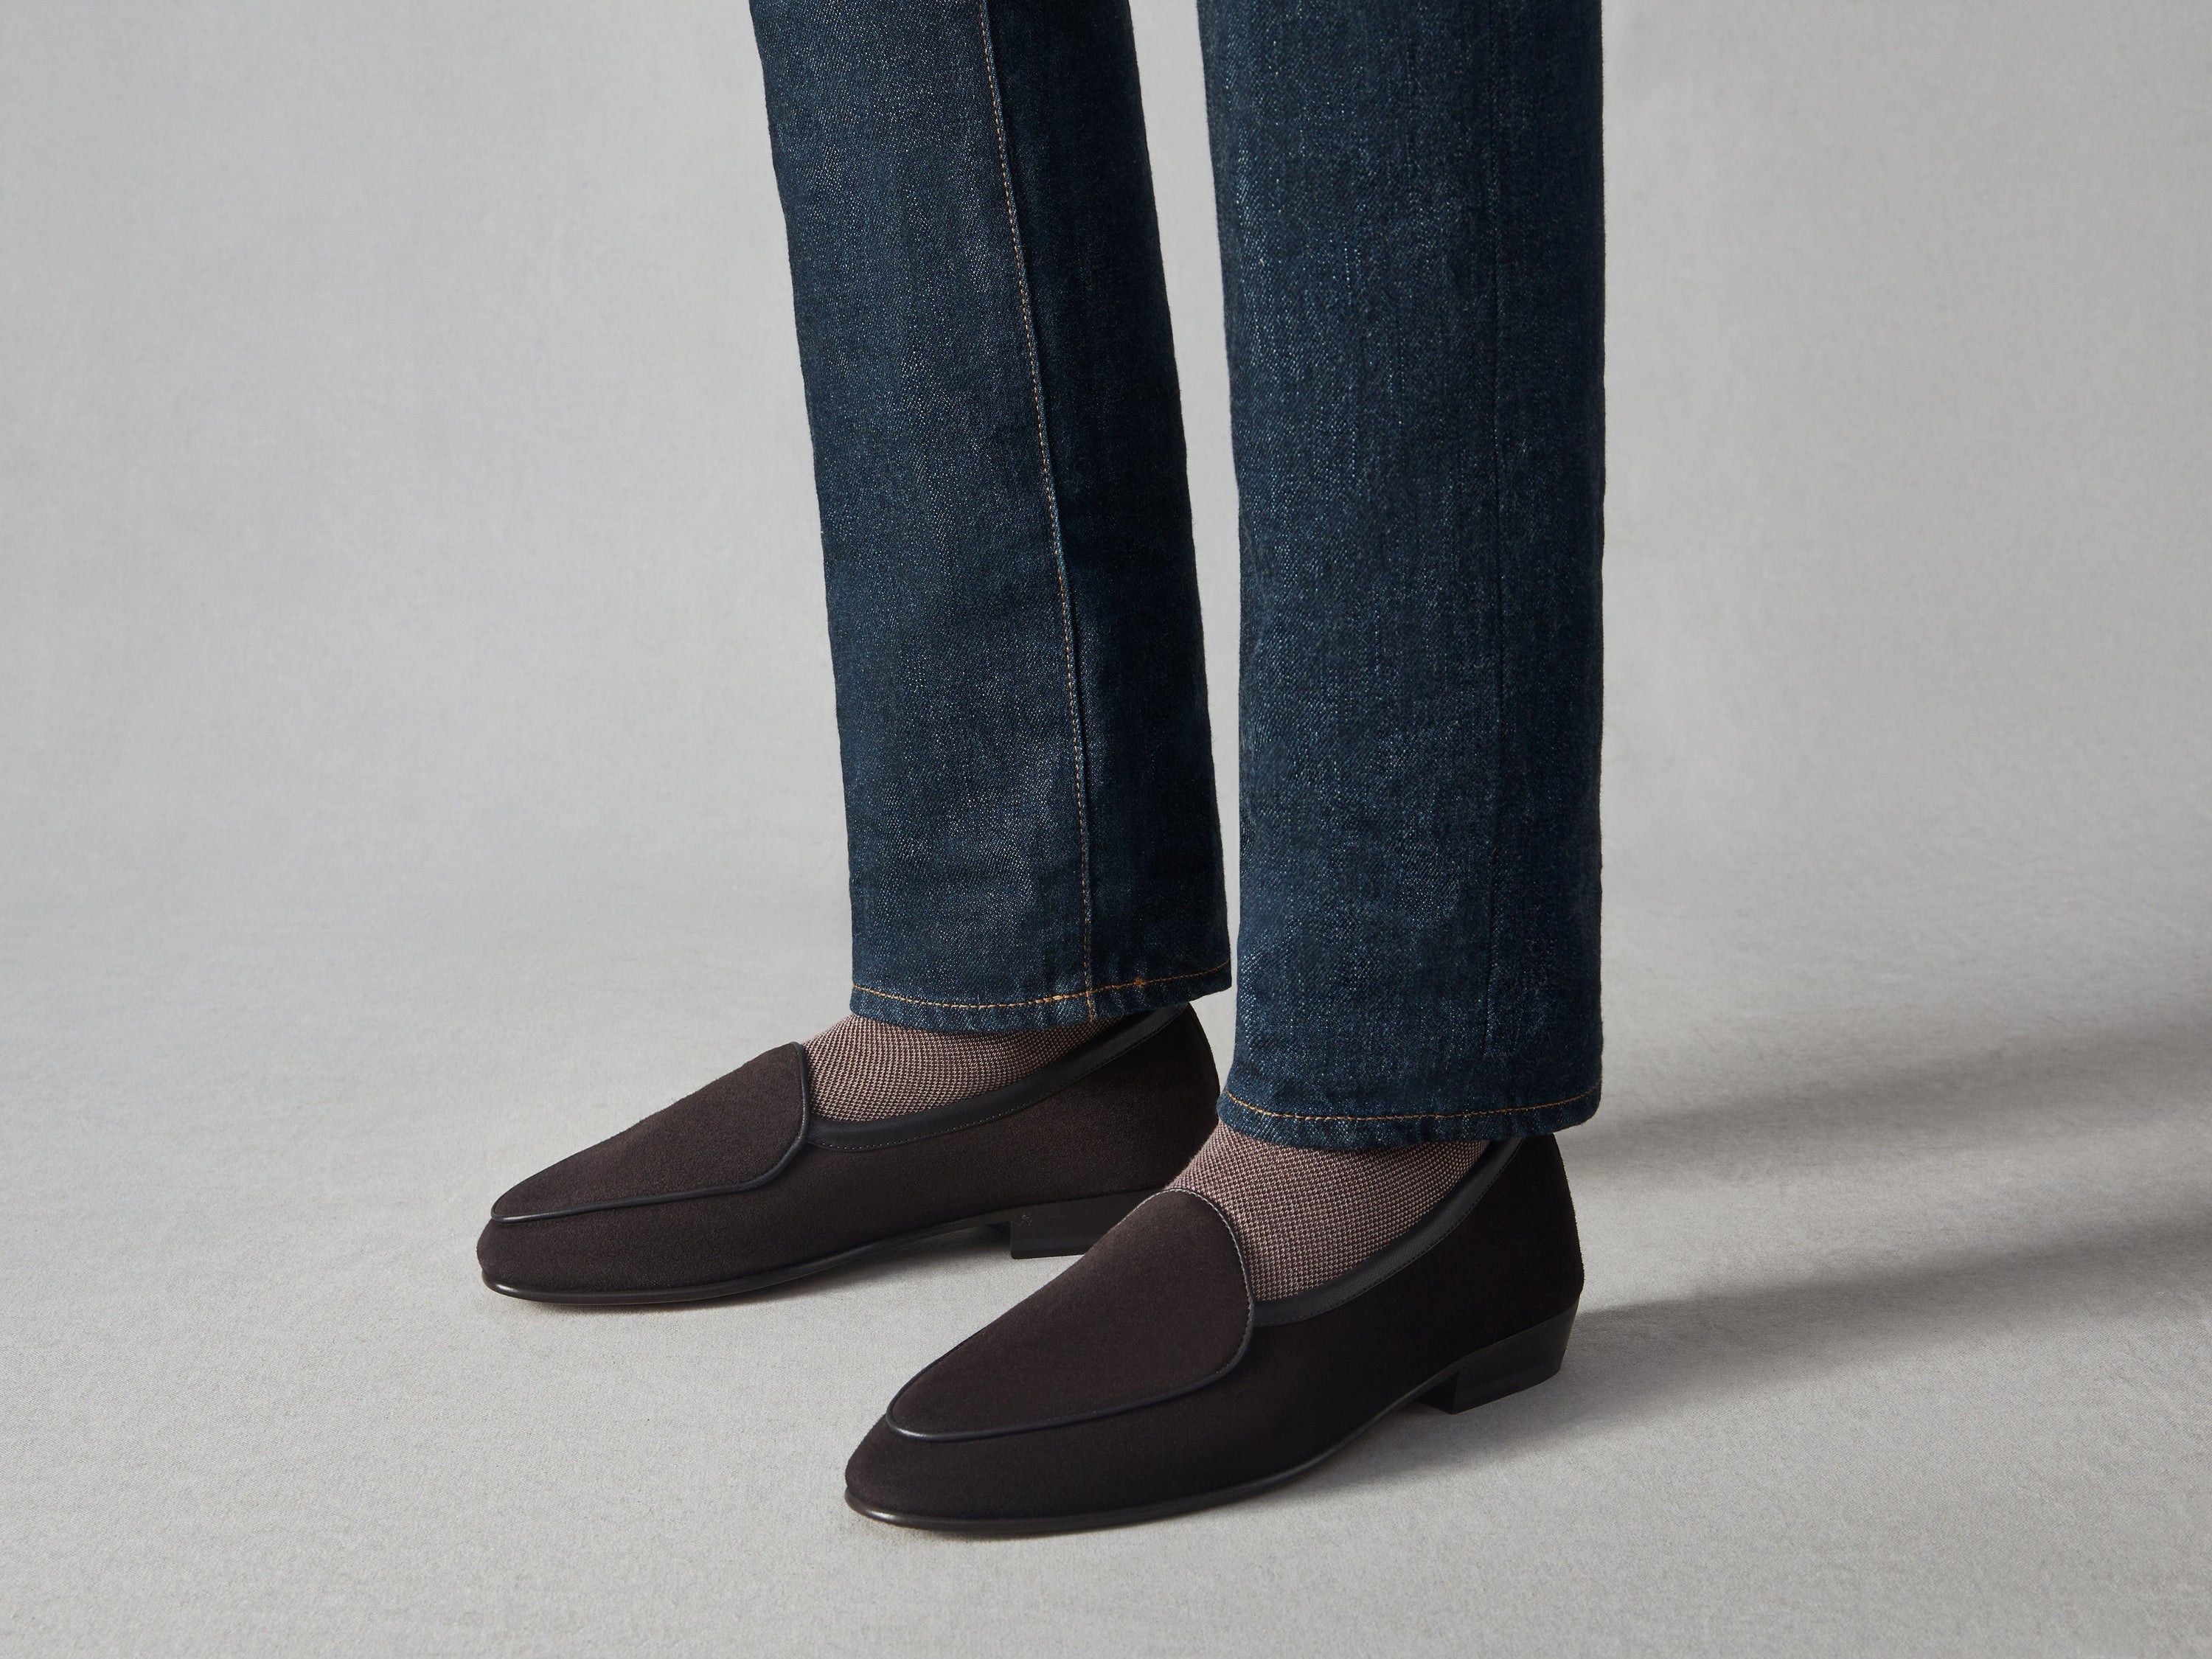 Sagan Classic Loafers in Lusitanias Dark Brown Suede